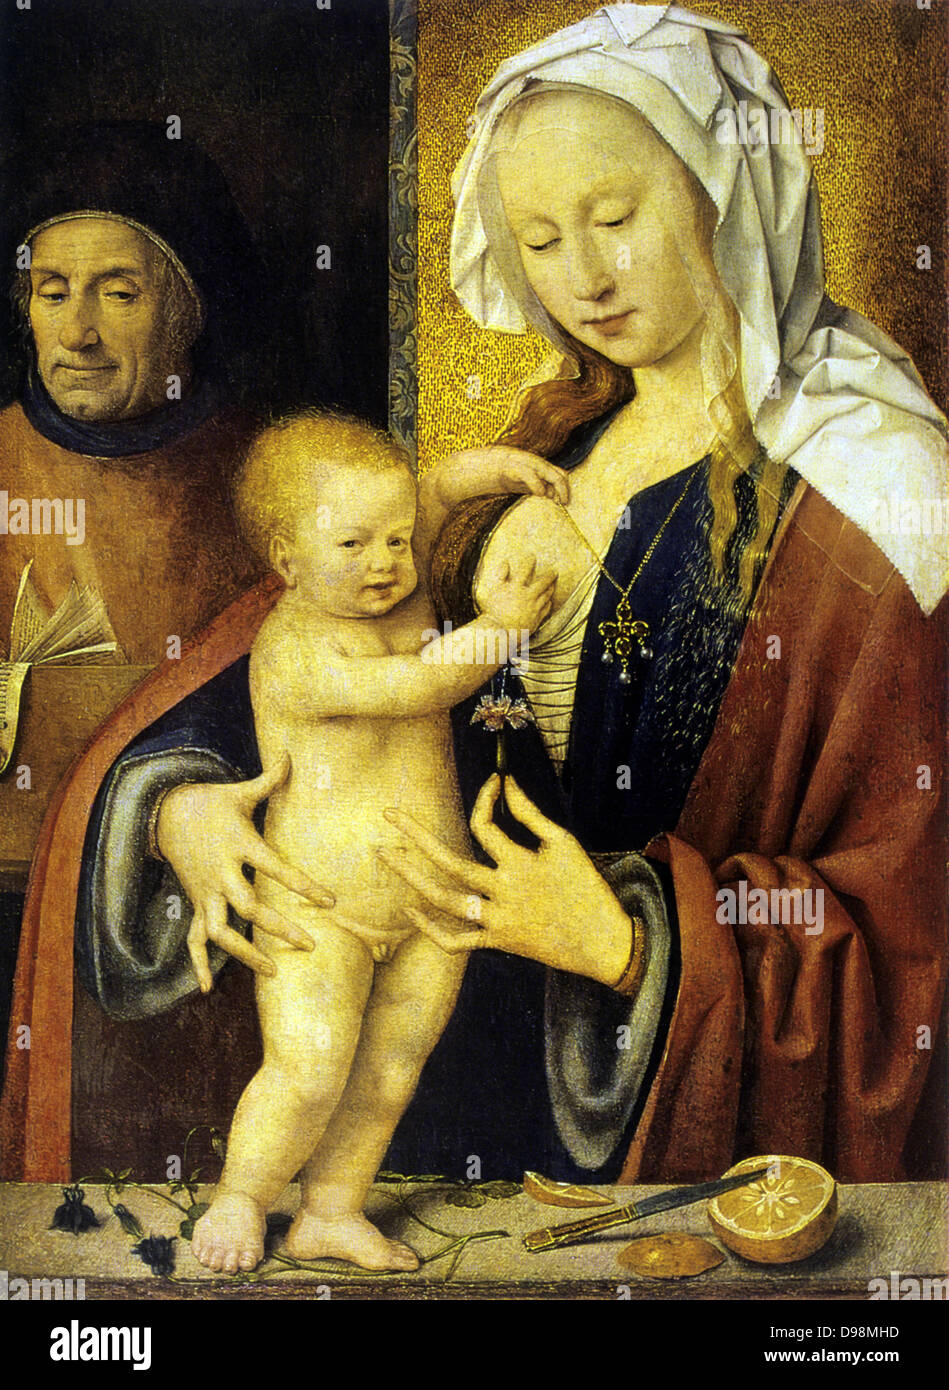 The Holy Family' Joos van Cleve (c1490-1540) Netherlandish painter. Mary supports standing infant Jesus as Joseph looks on fondly. Aquilegia used to ease pain of childbirth. Orange symbol of love and marriage. Stock Photo